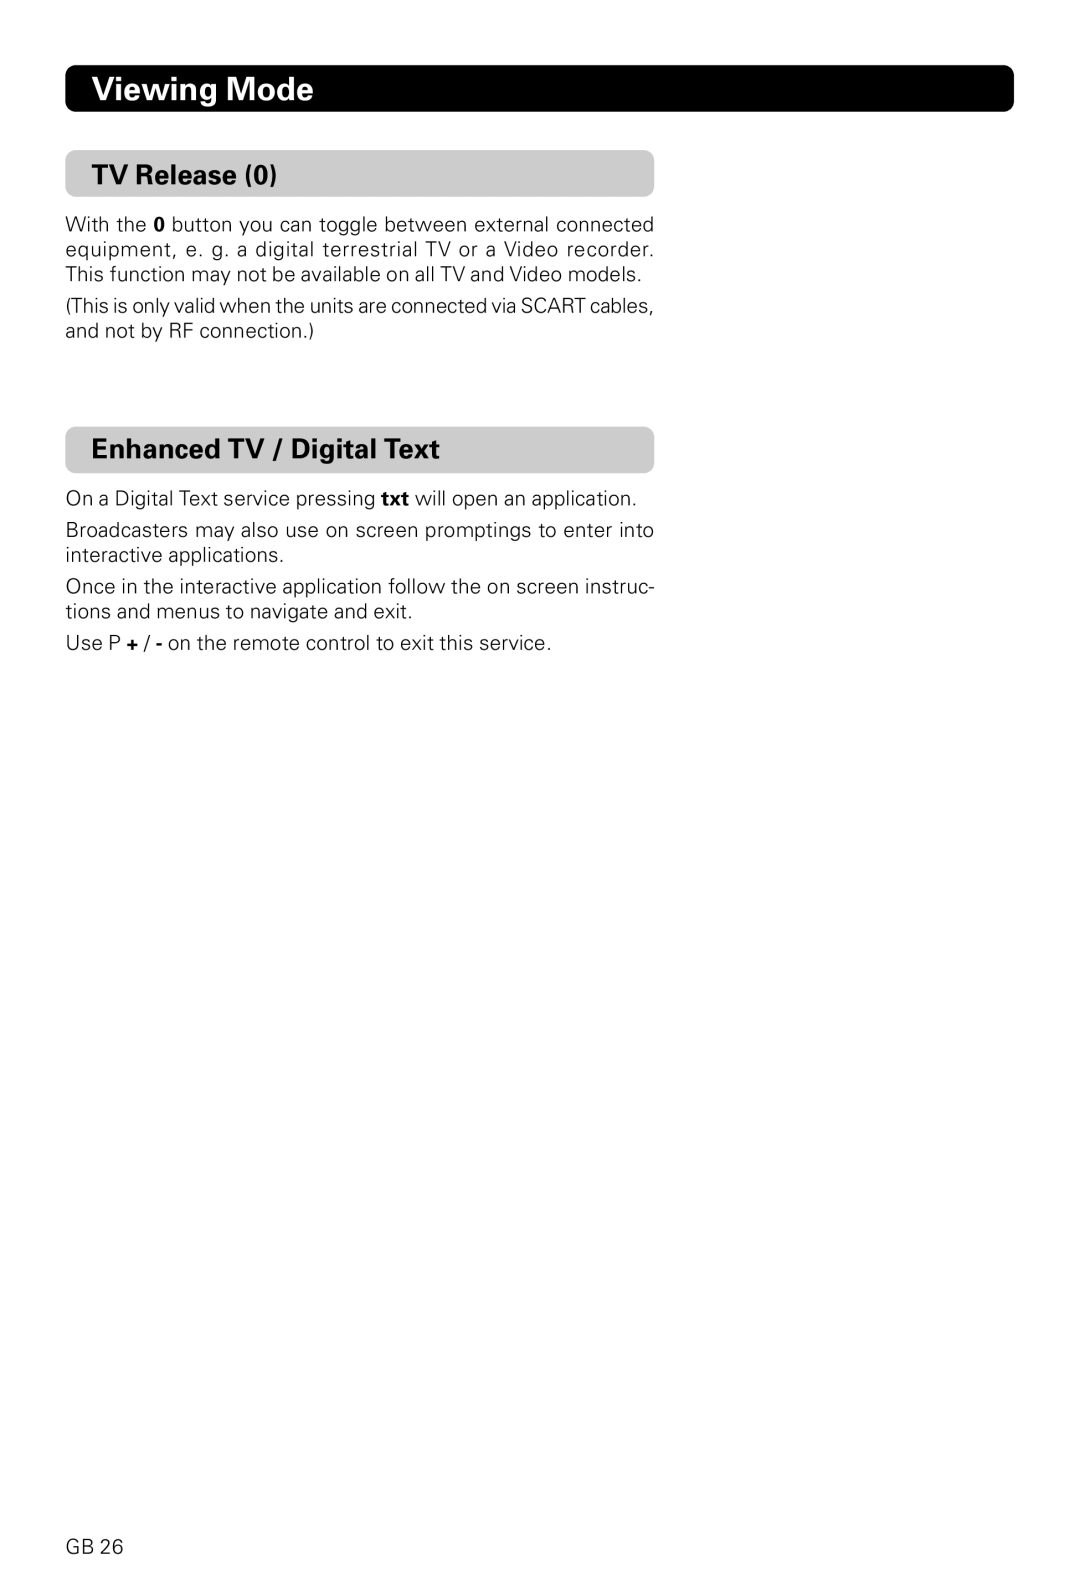 Nokia 221 T owner manual TV Release, Enhanced TV / Digital Text, Viewing Mode 